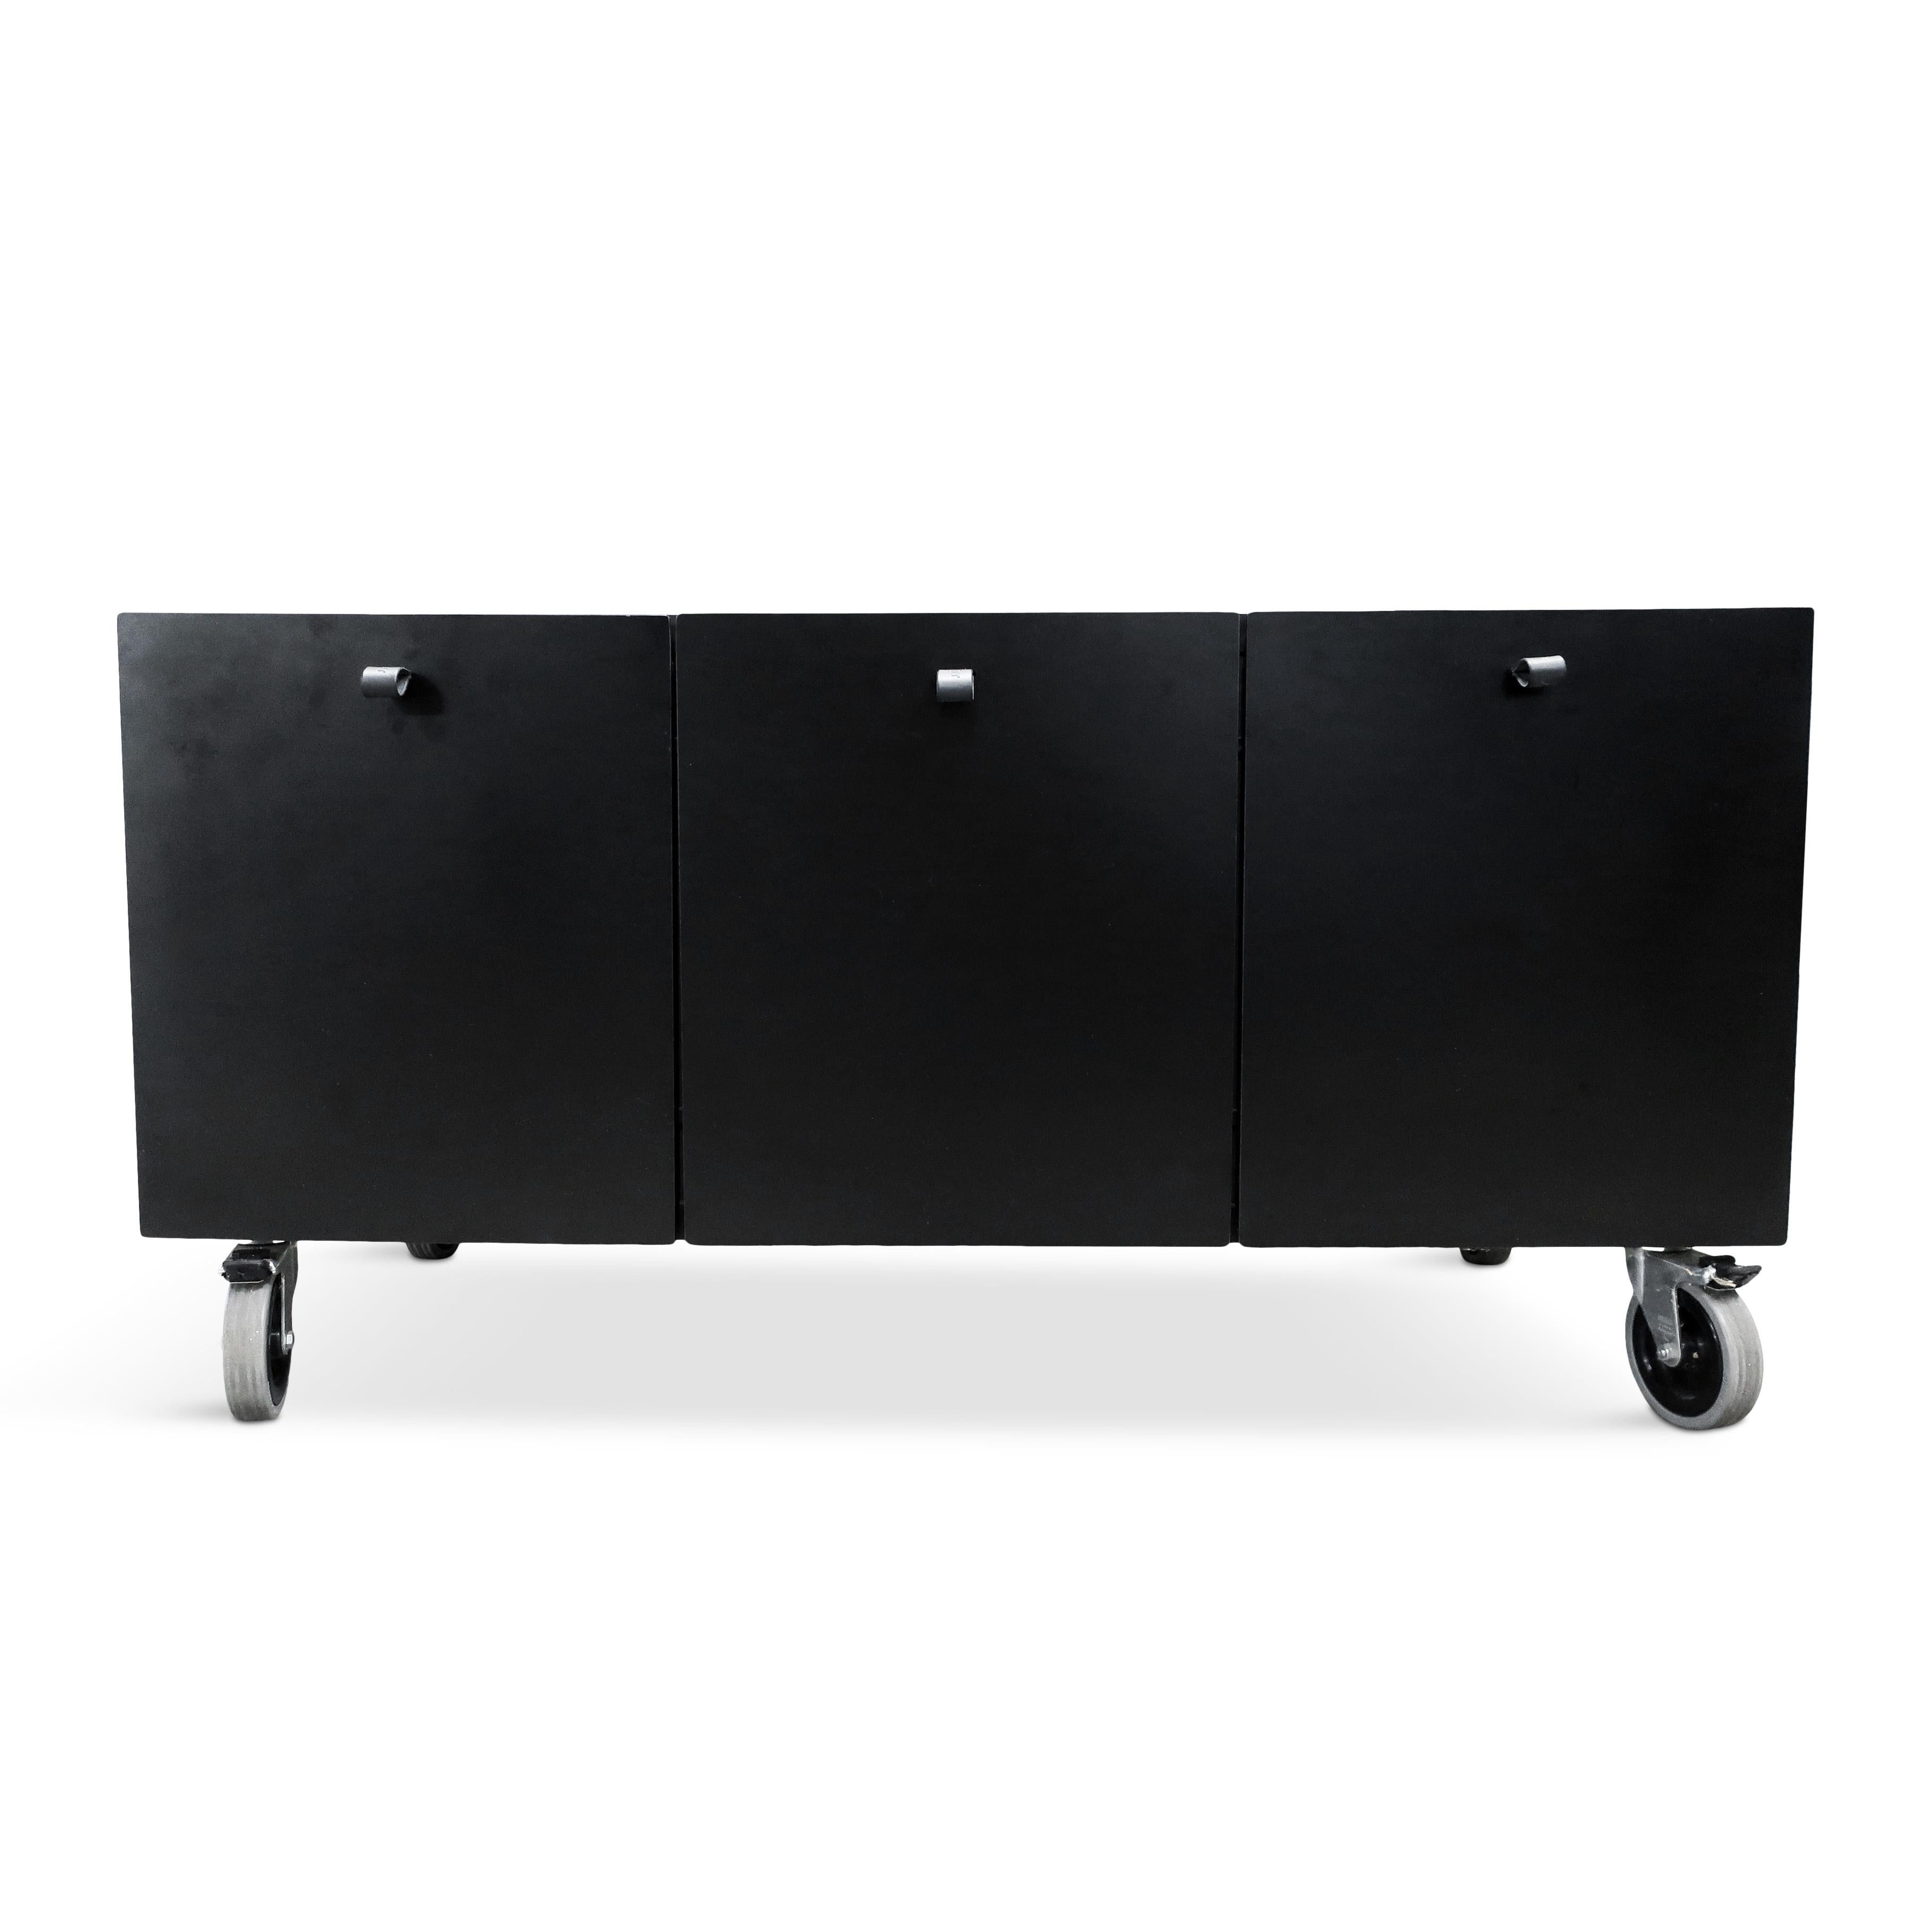 A well-designed rolling storage cabinet or credenza by Bulo, the Belgian furniture maker. A simple rectangular case with three storage areas, open on the left and right with a hanging file drawer in the middle. Very cool BULO embossed pulls on the